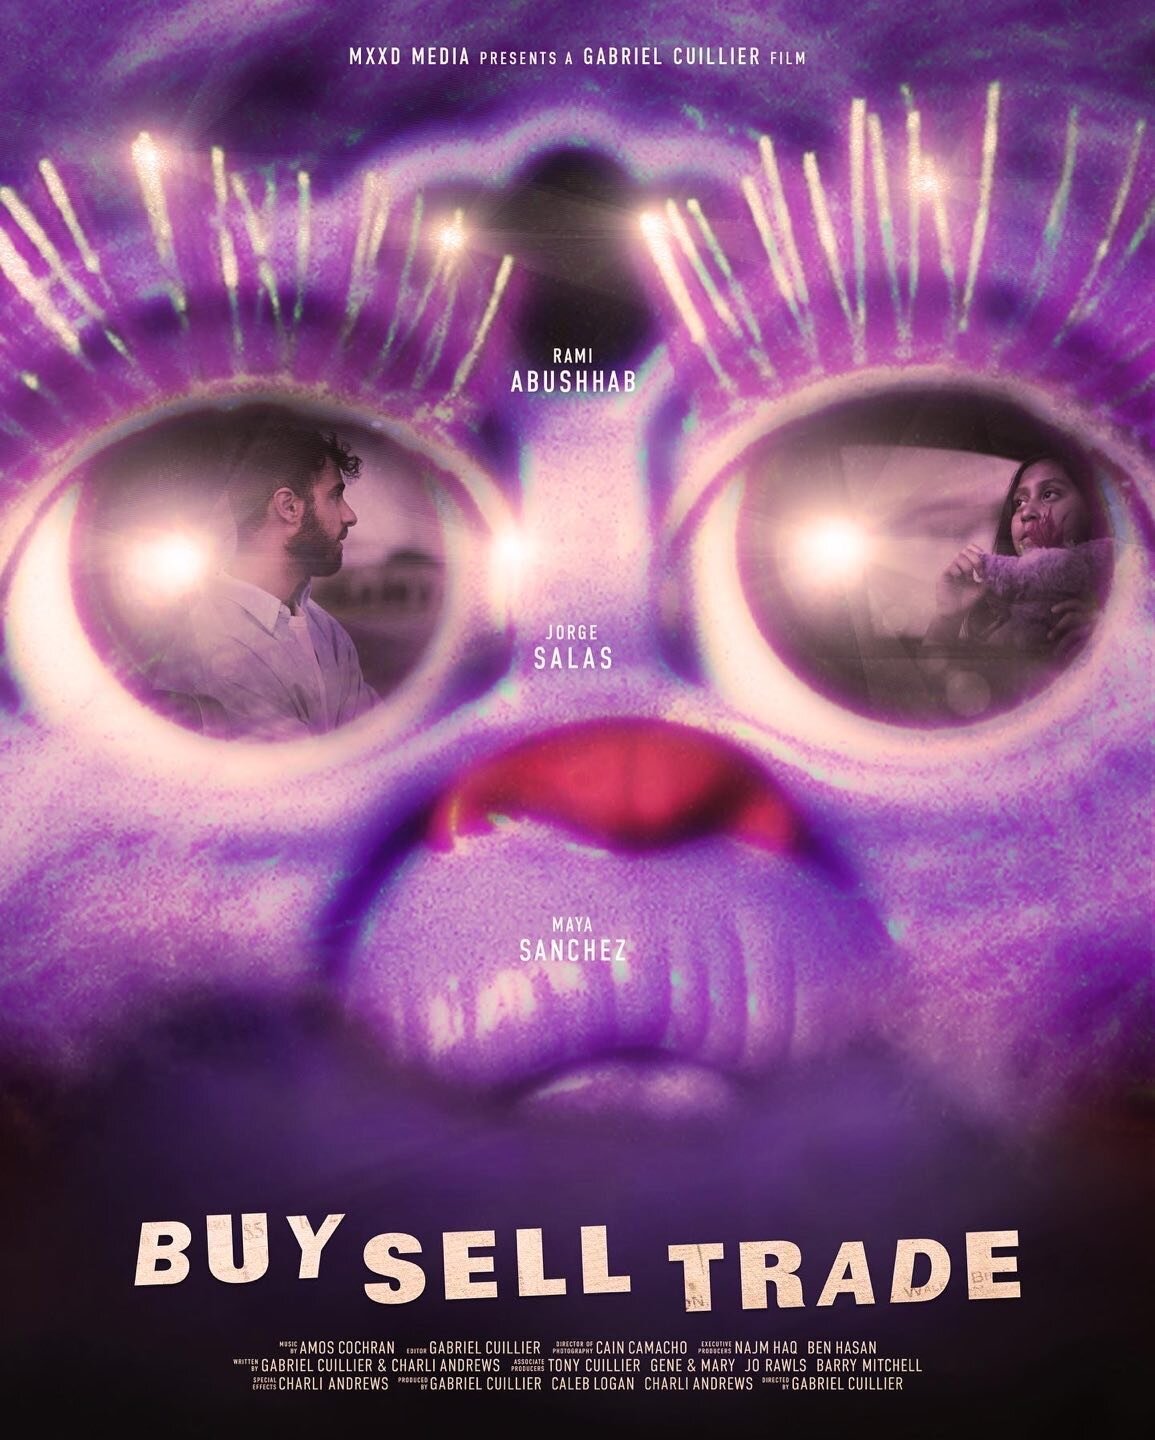 We made it to October. Time to bring back the fan favorite, but slightly spooky @buyselltrademovie alternative poster 👻

🎨 by @vic_birr